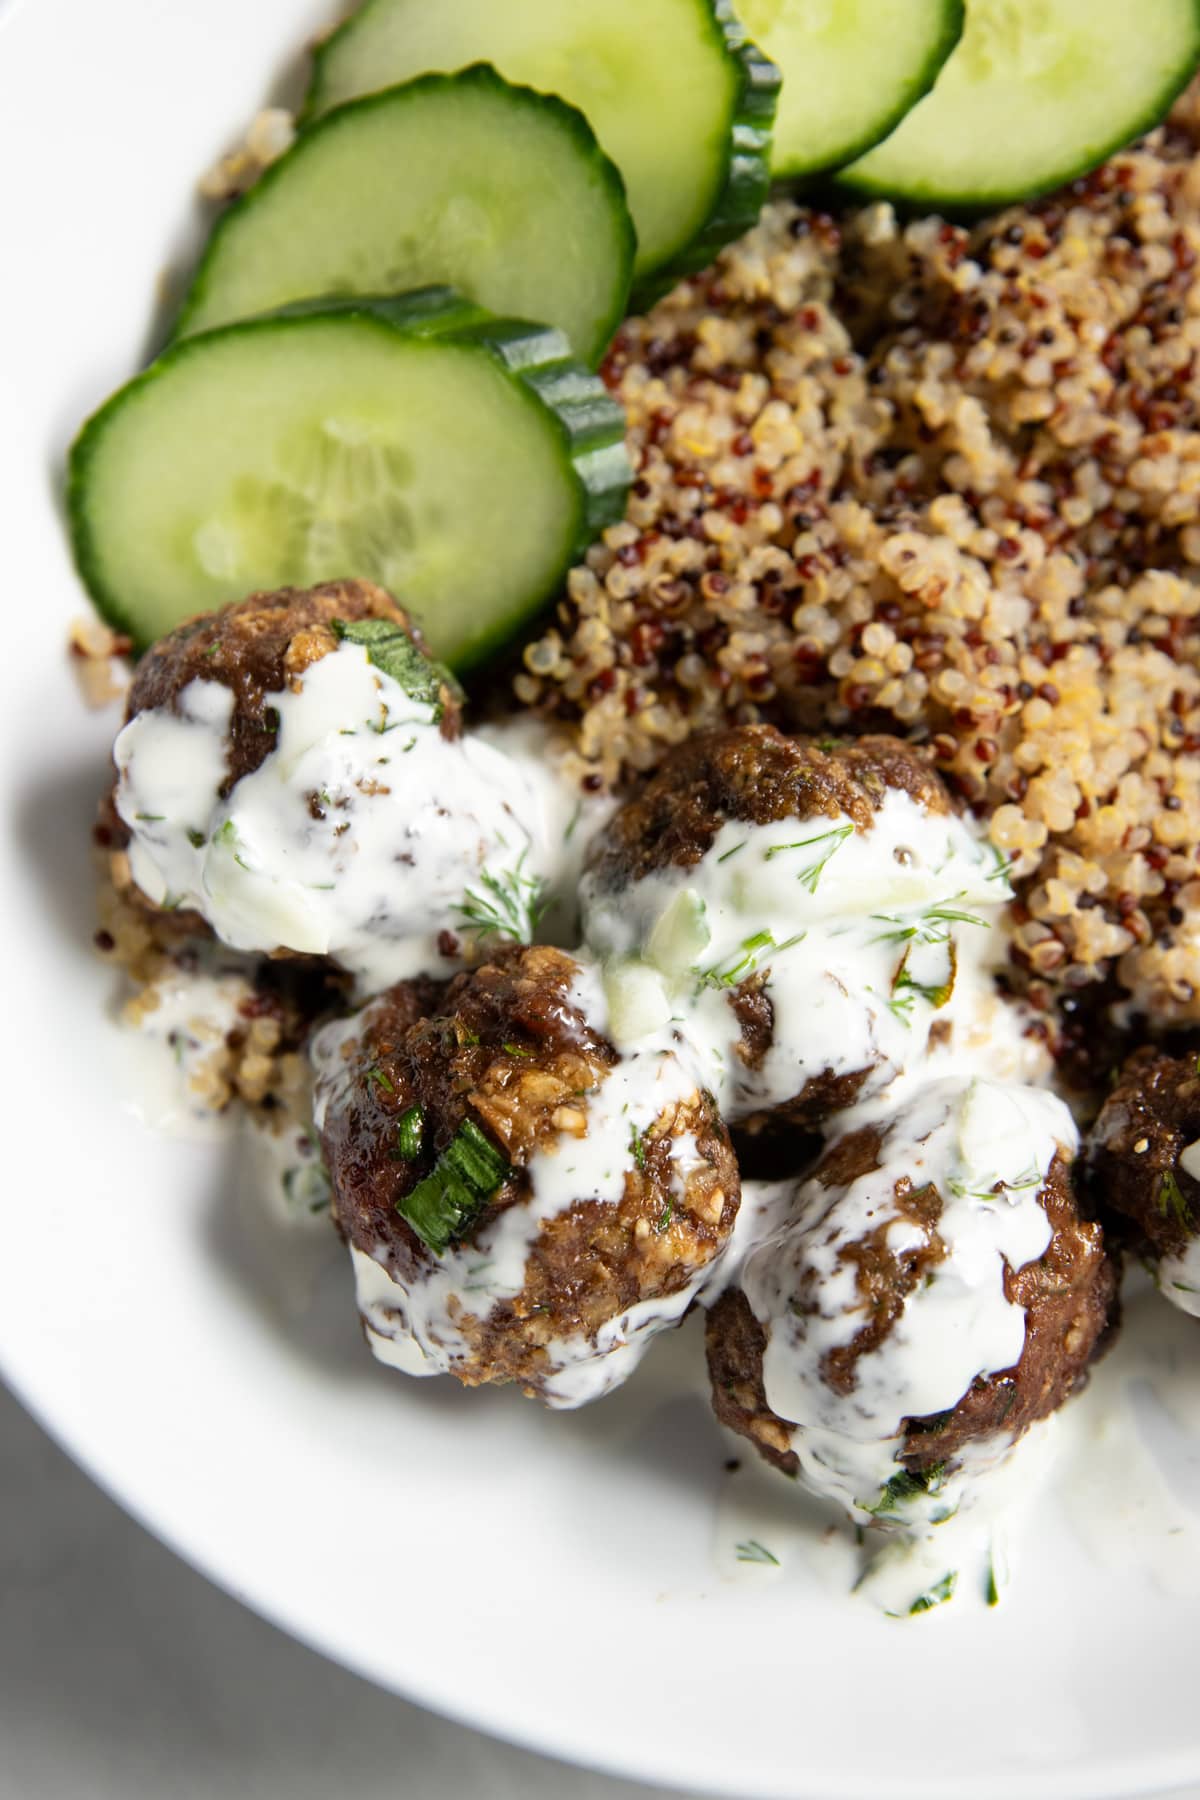 Focused on a handful of beef meatballs drizzled with a creamy dill sauce and sitting next to cooked tri-color quinoa and cucumber slices.